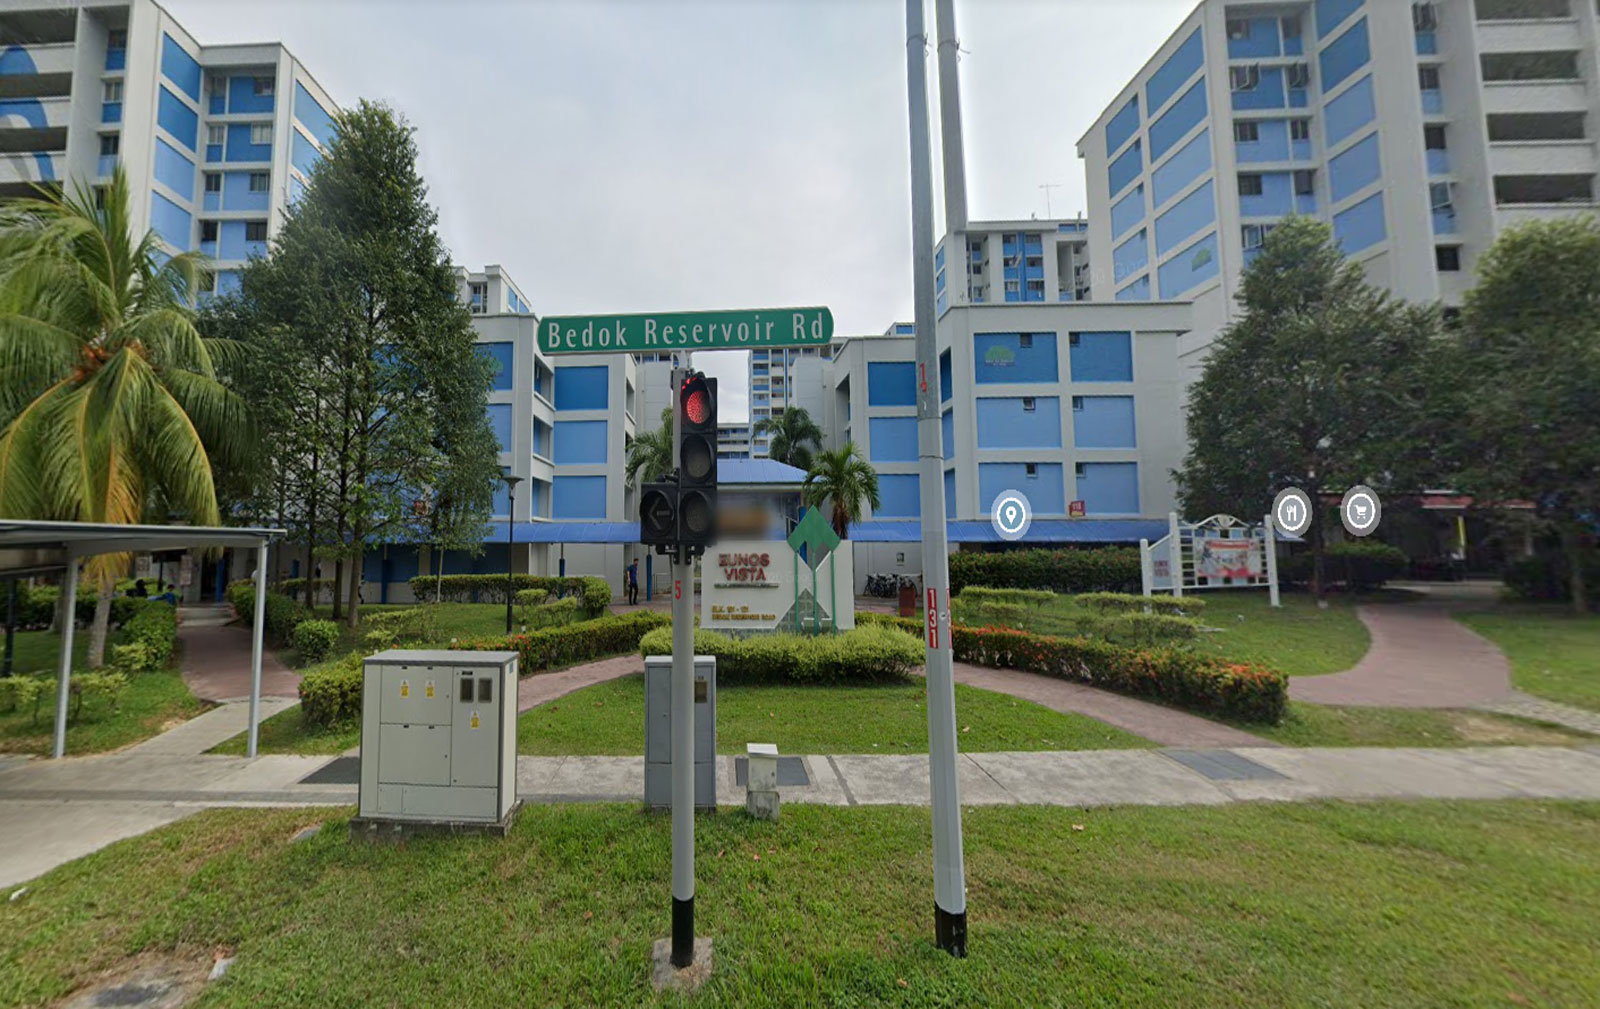 Approximately 7 minutes walk from Urban Treasures to The Community Hub @ Vista Singapore